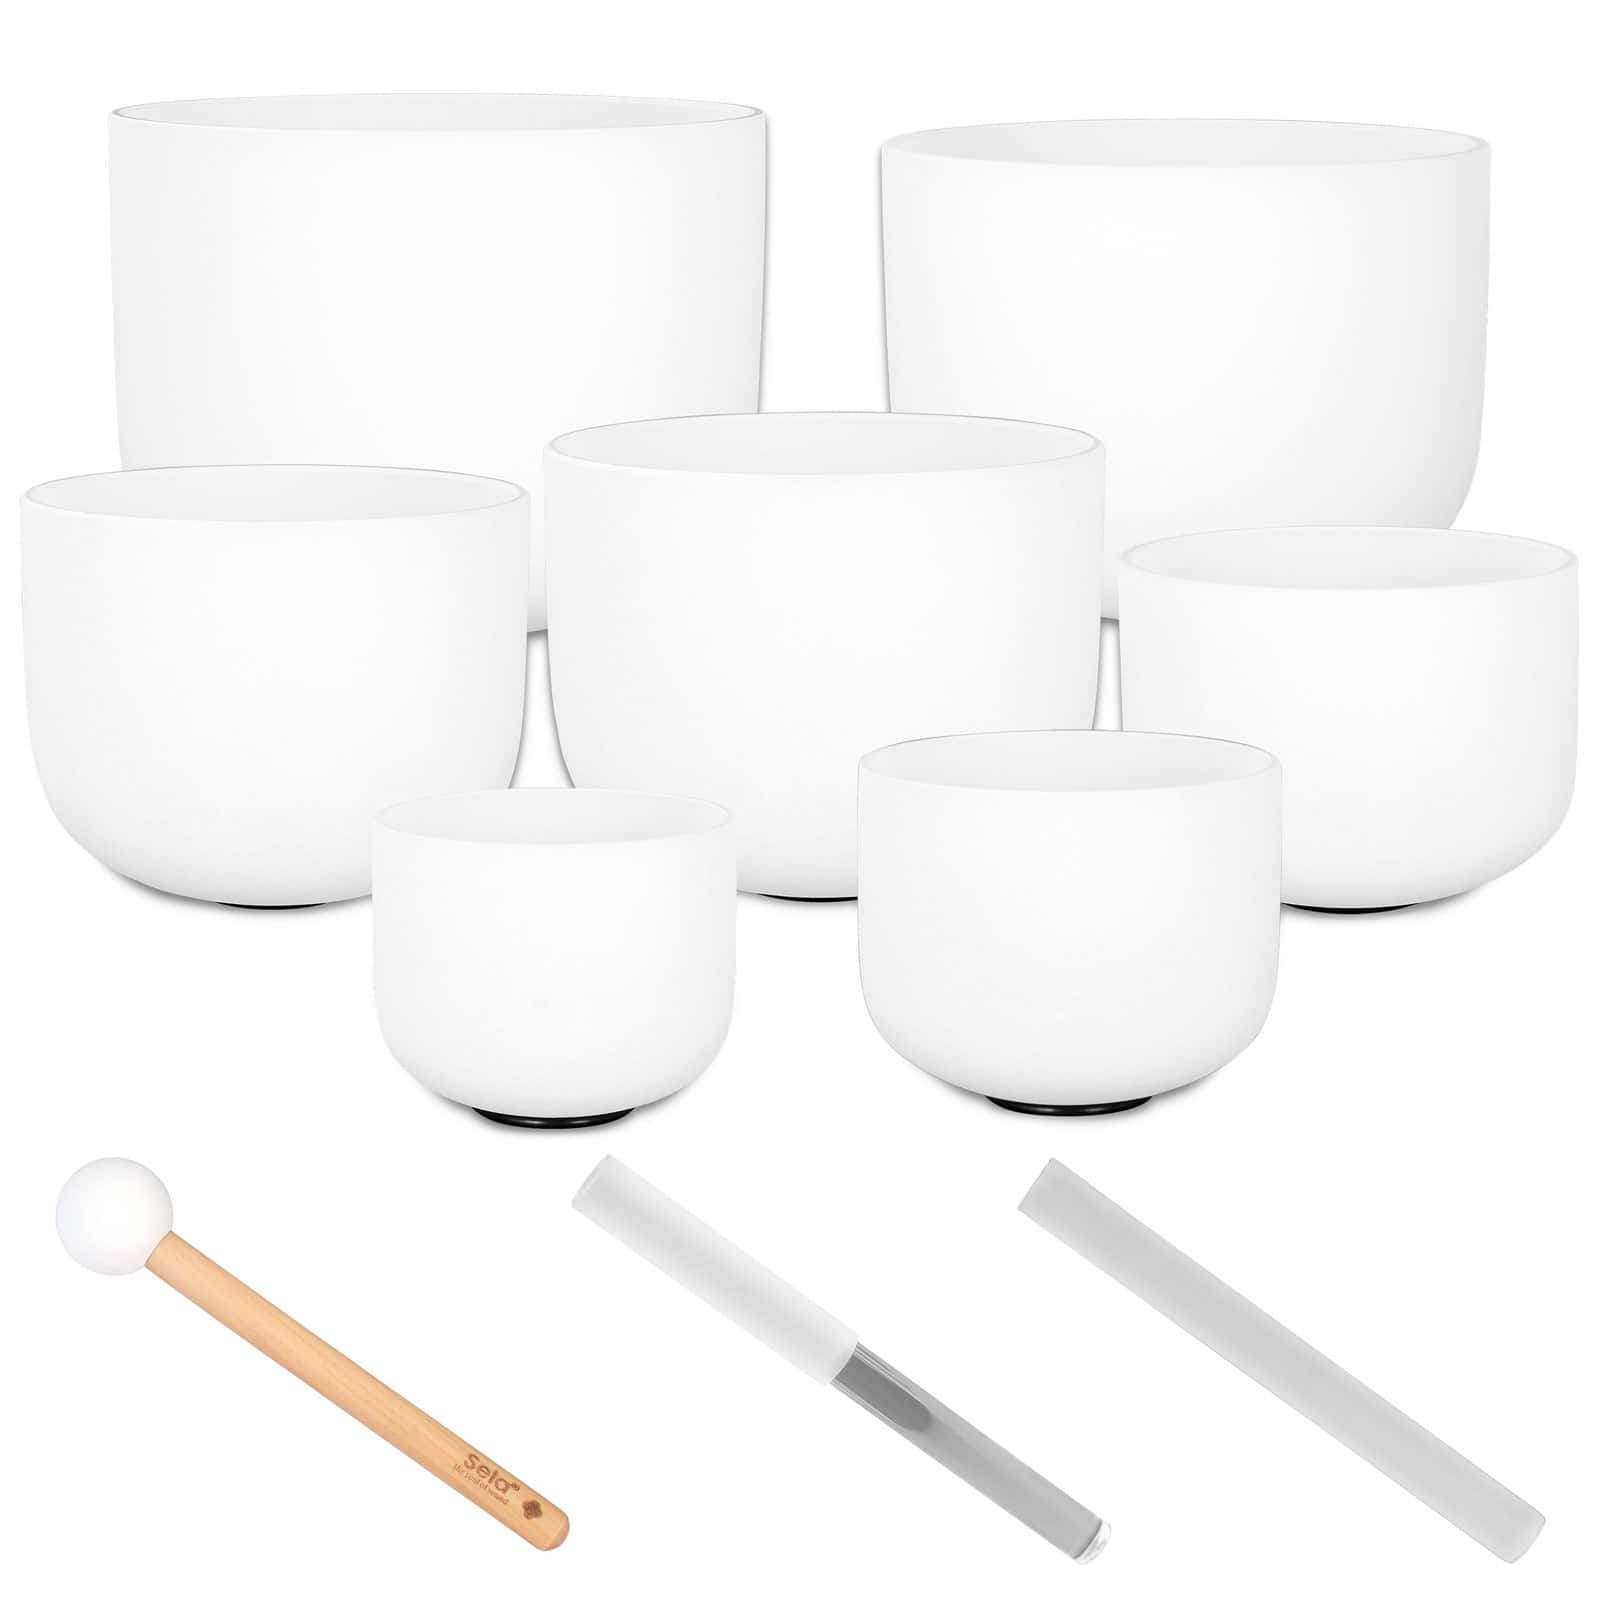 SELA PERCUSSION CRYSTAL SINGING BOWL SET FROSTED 440HZ (7PCS)